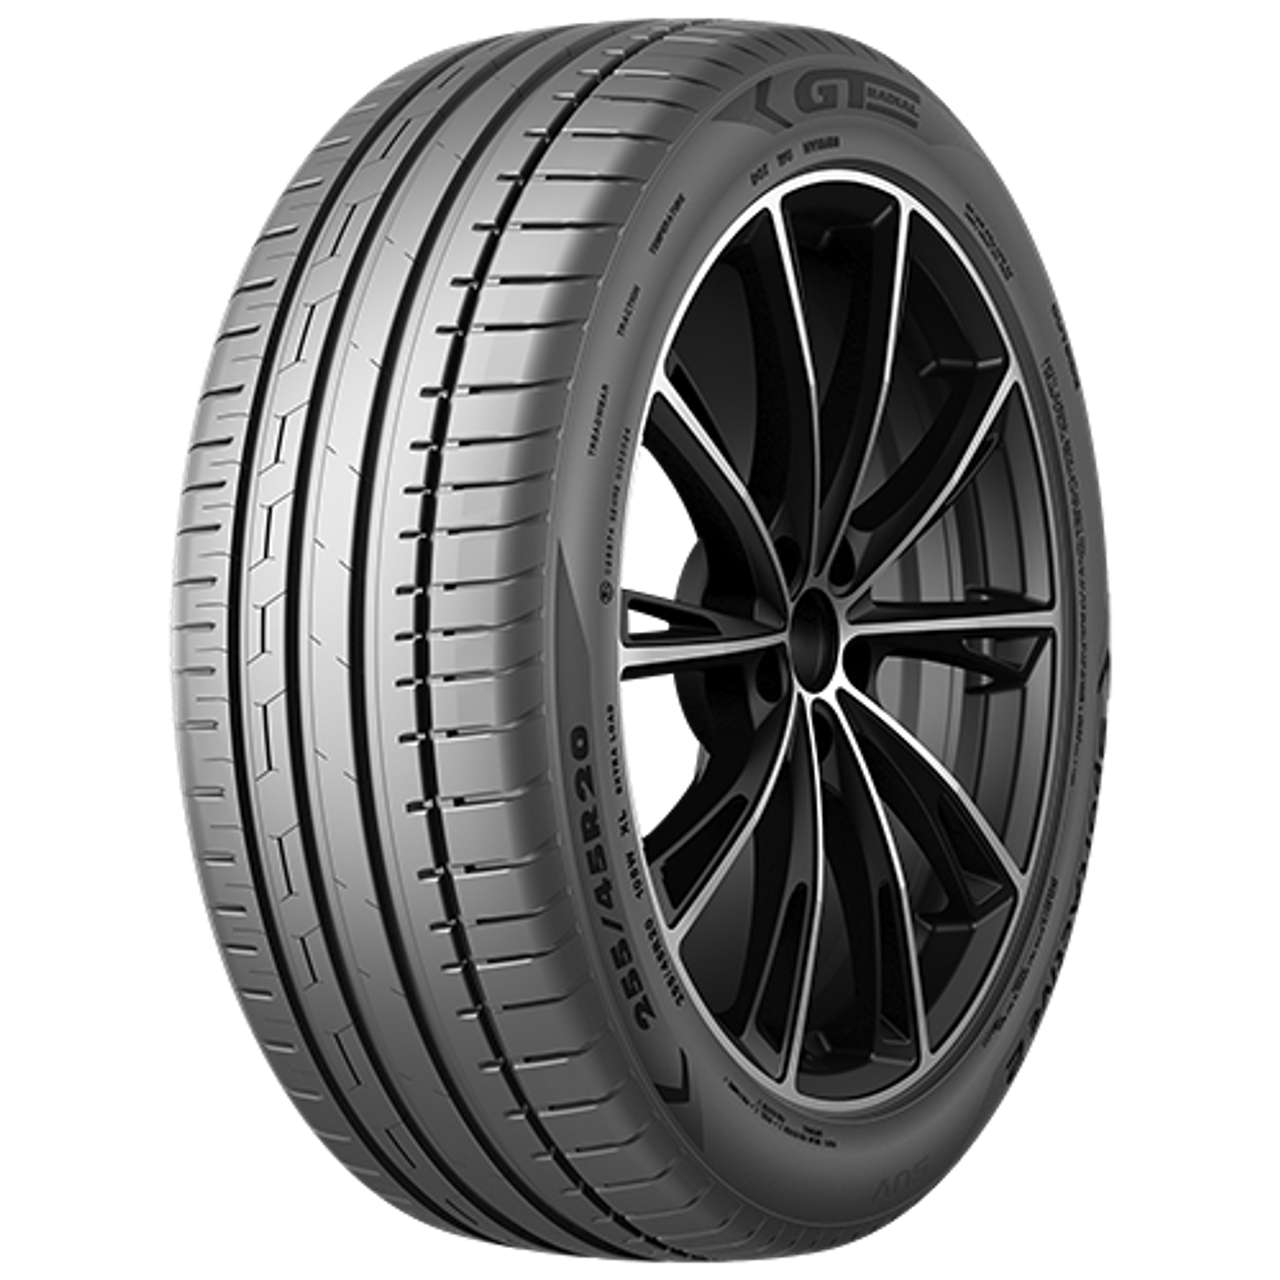 GT-RADIAL SPORTACTIVE 2 SUV 235/55R19 105W BSW